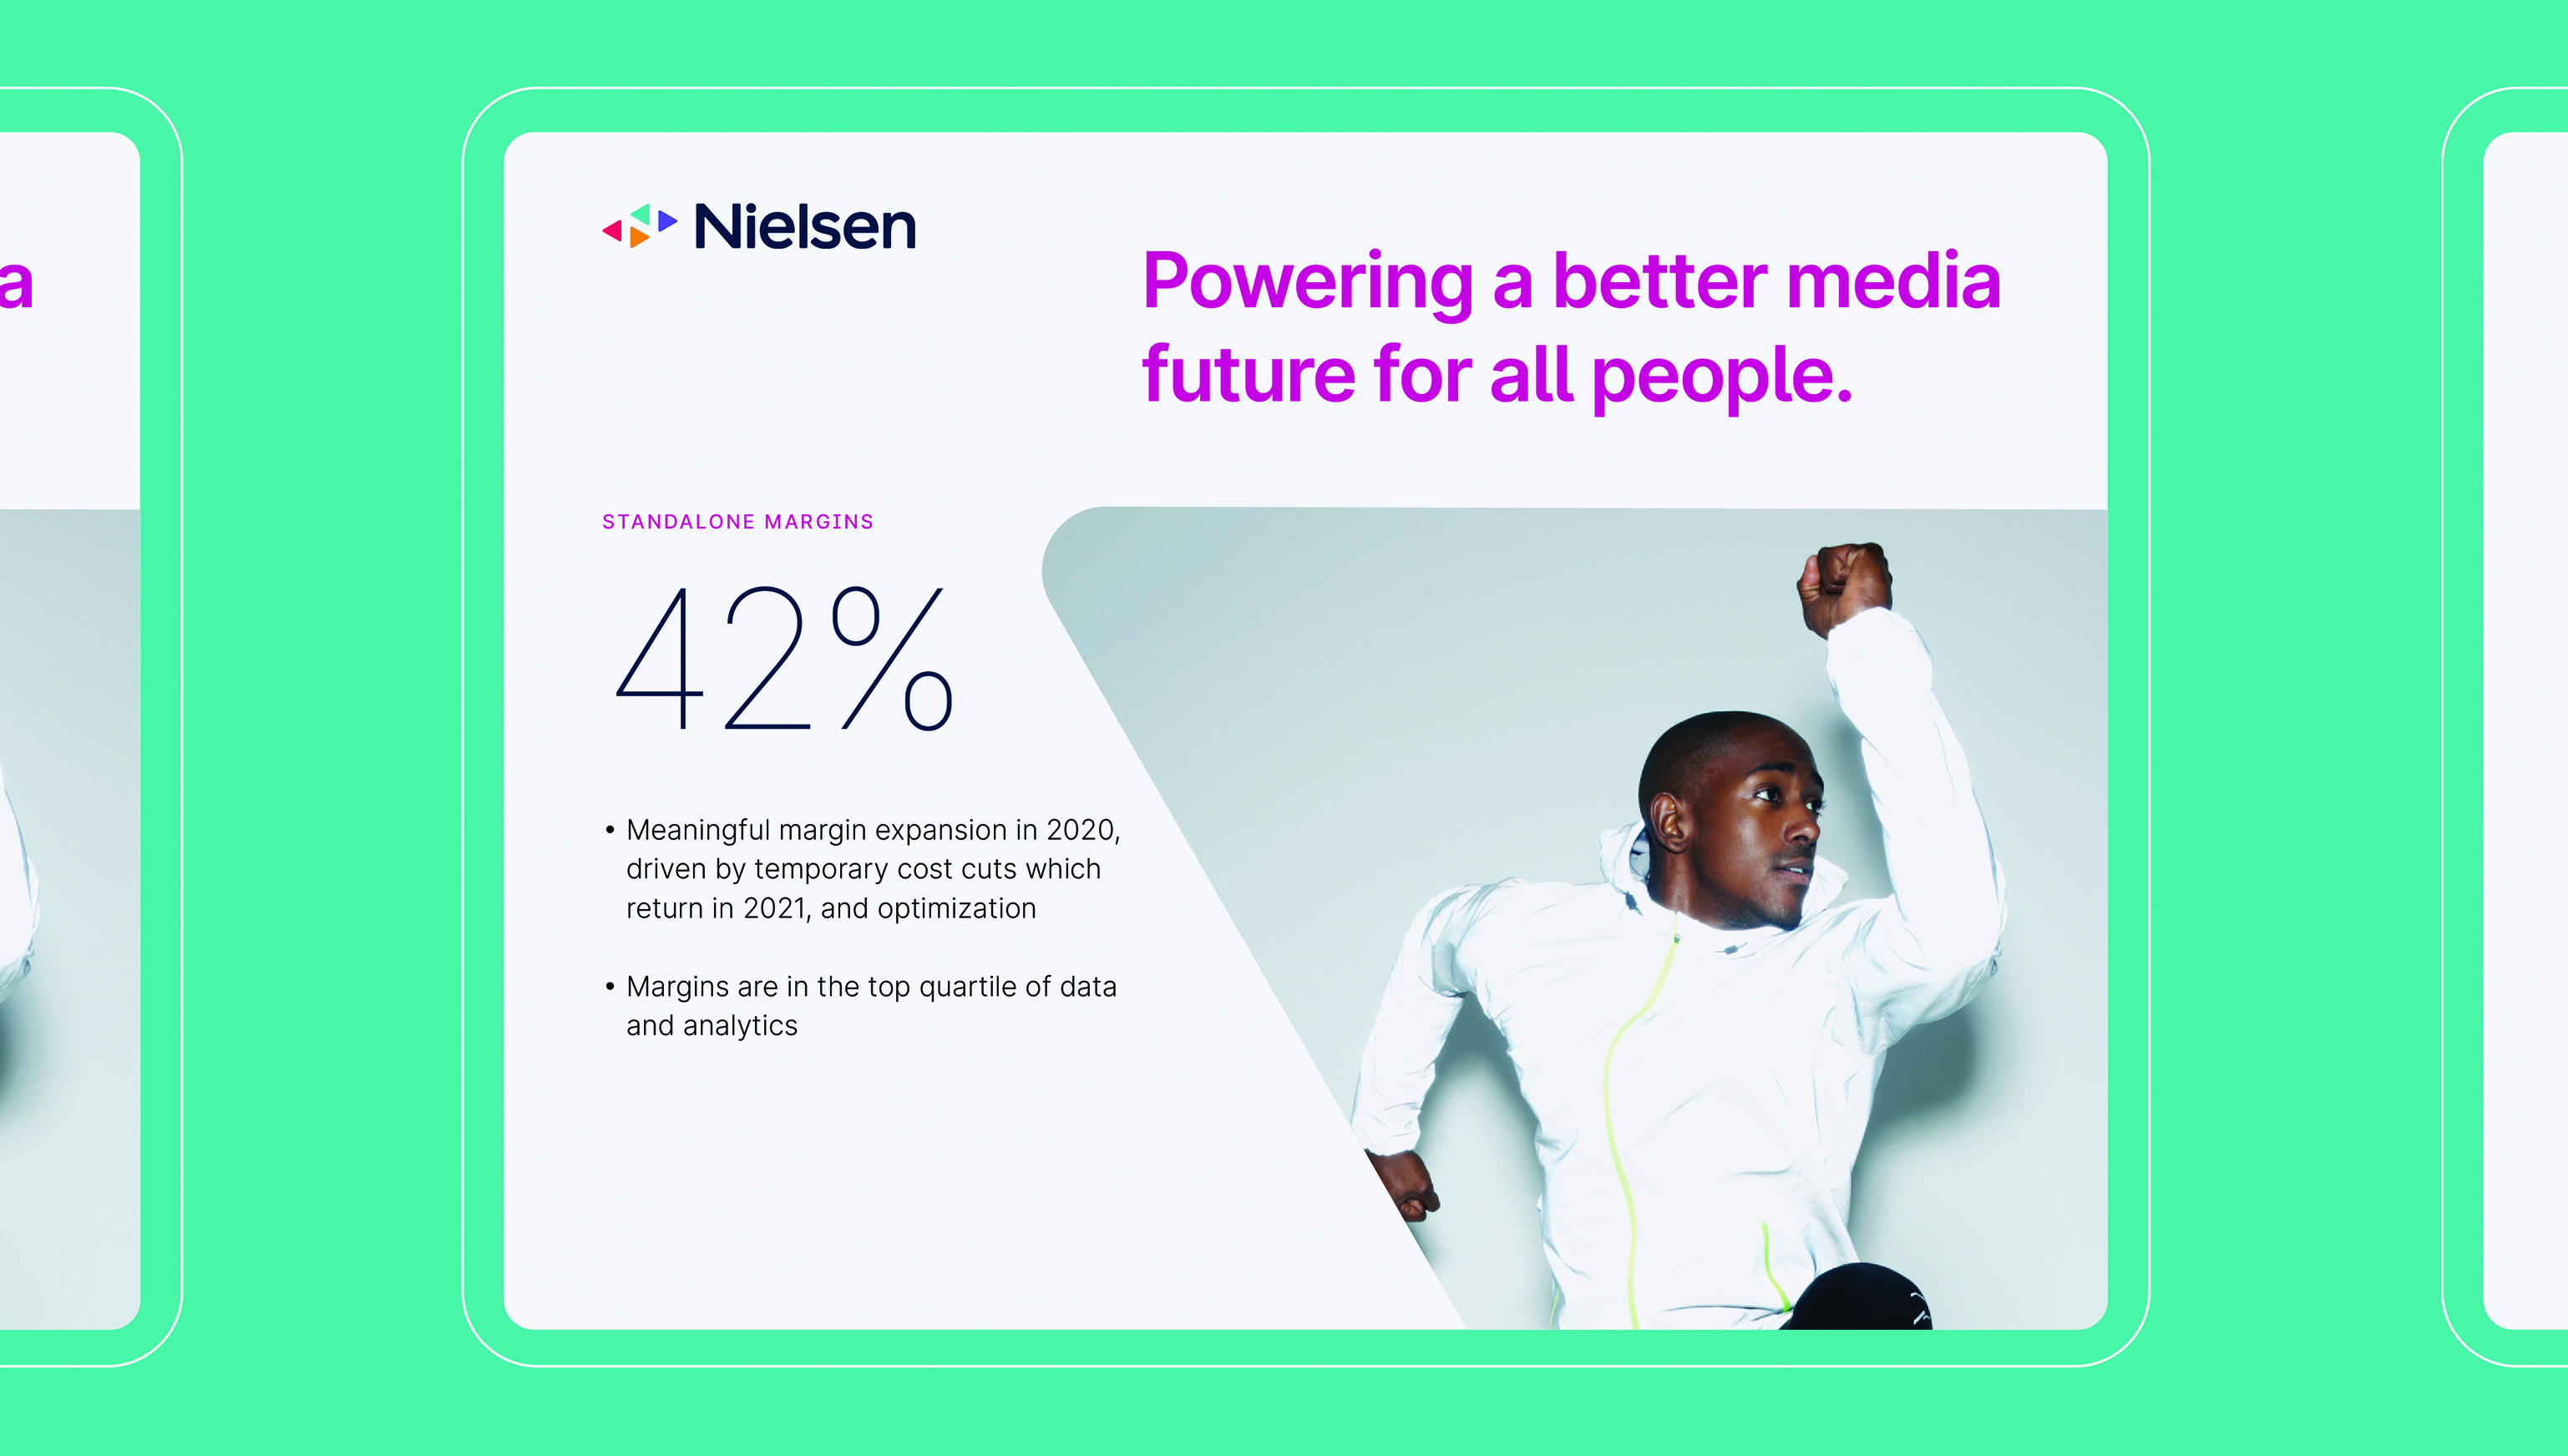 Nielsen's slide with their meaningful margin expansion in 2020 next to an athlete jumping